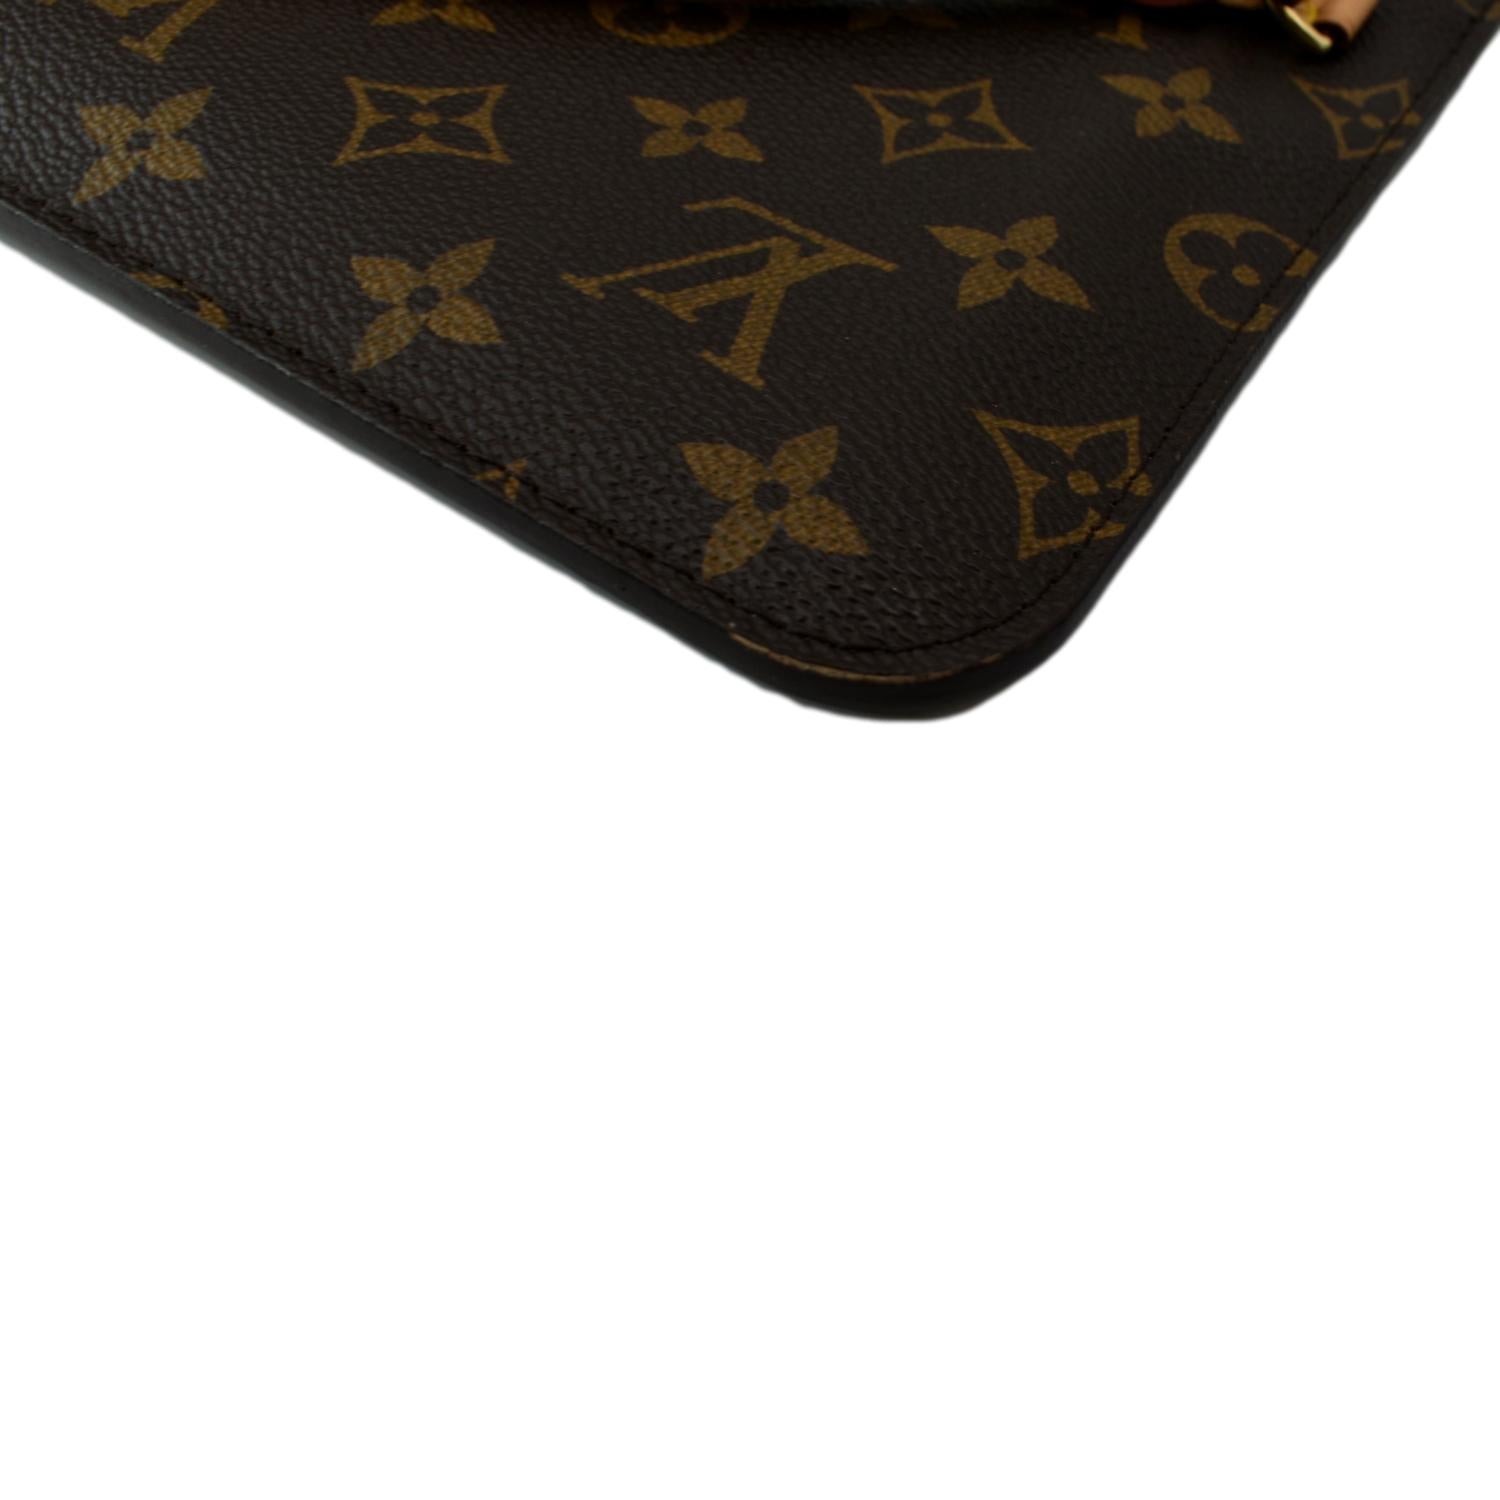 👍🏼 or 👎🏼on this new Pochette Metis color? : r/Louisvuitton